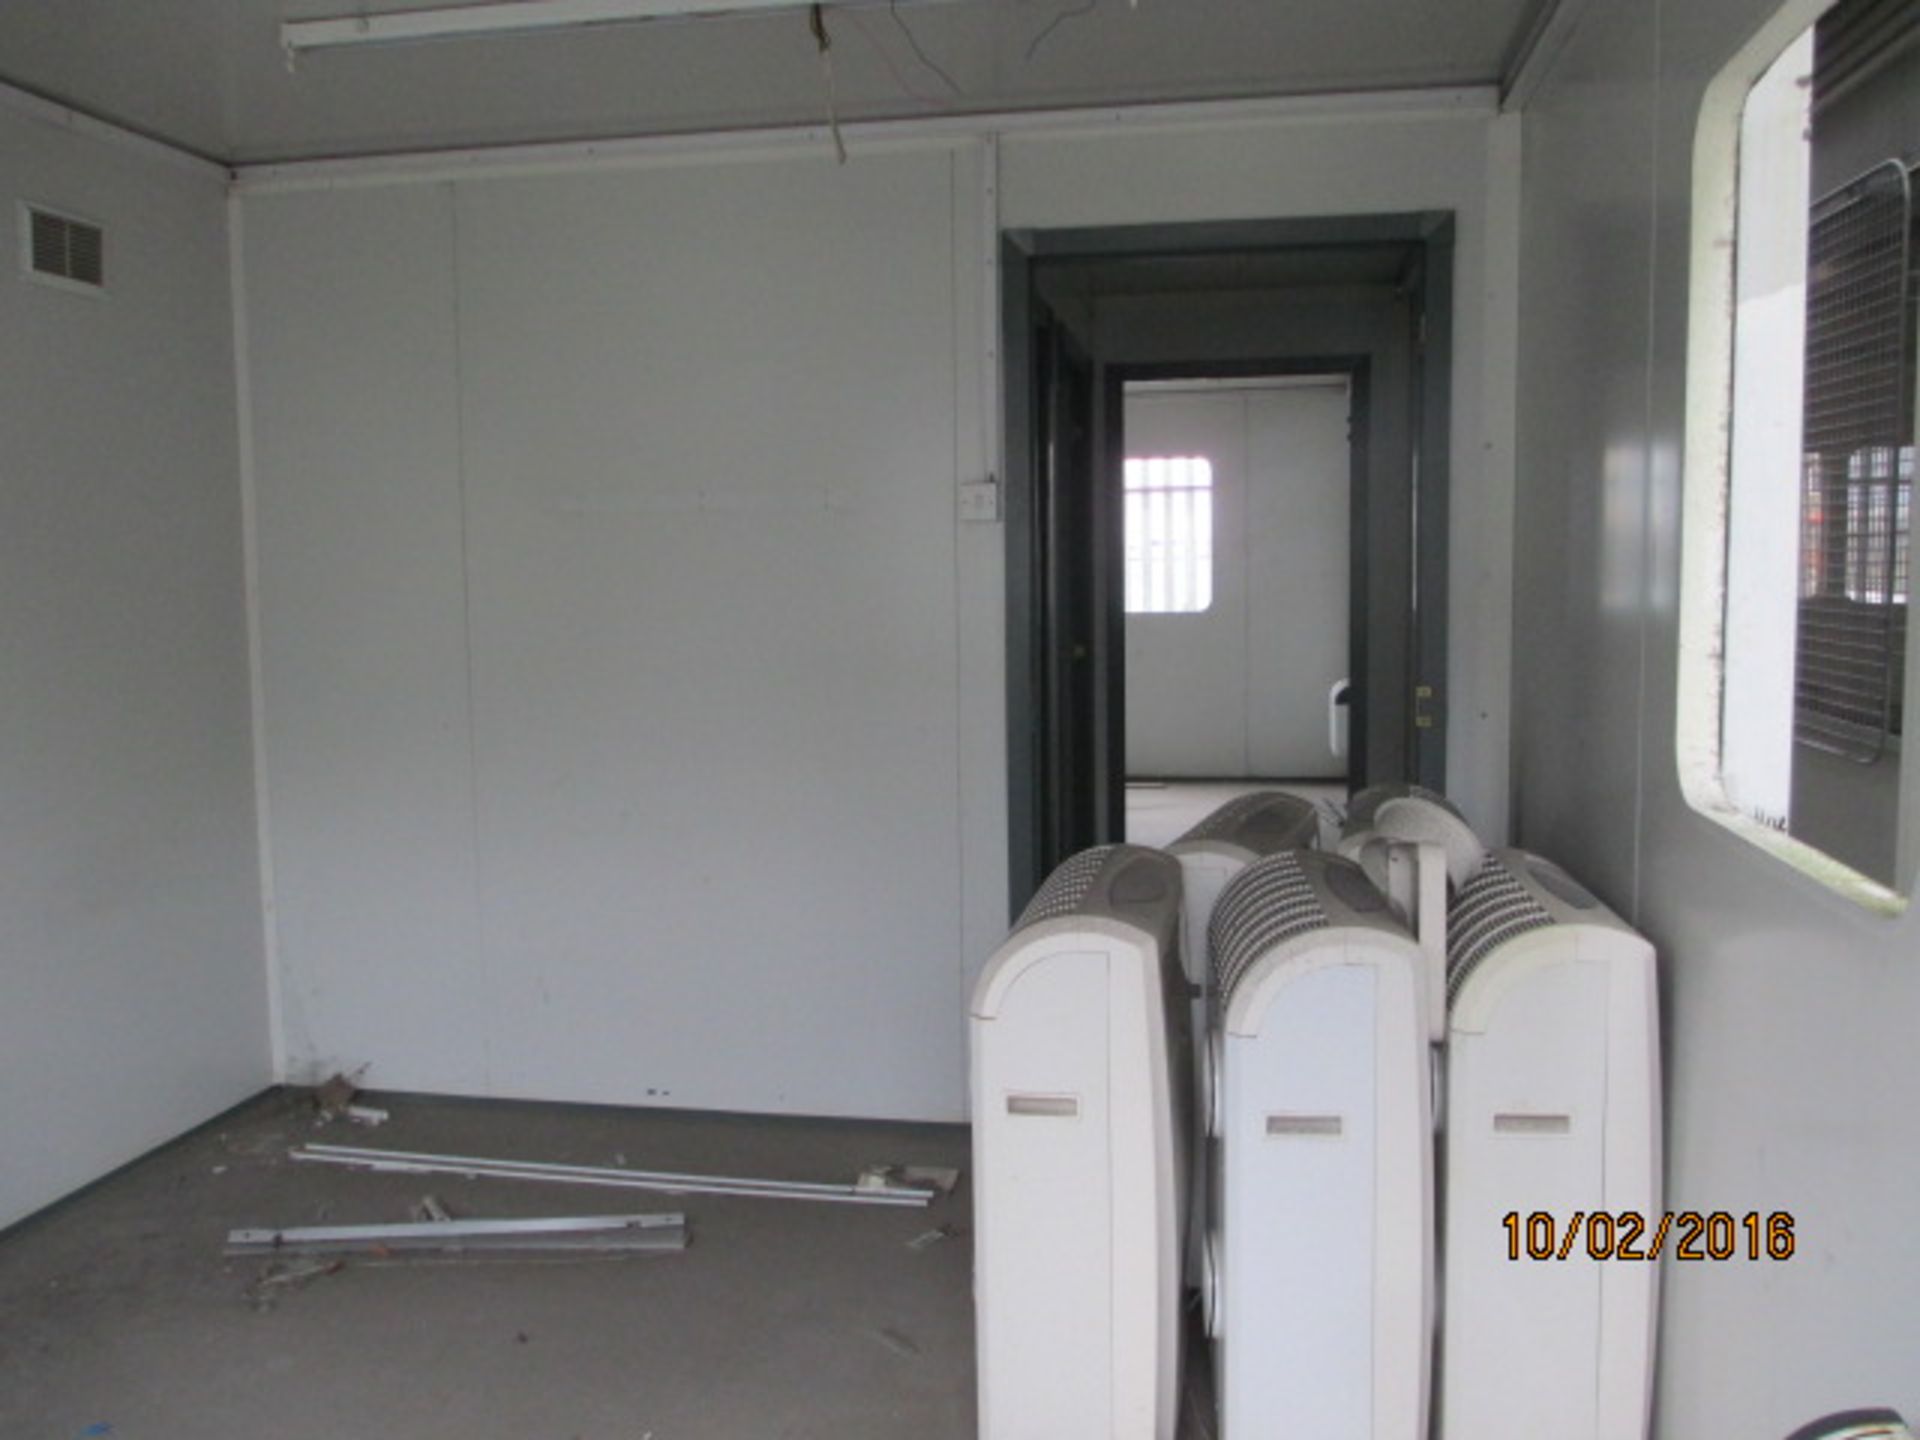 E47506 32X10 STEELCLAD - 2 OFFICES - Image 2 of 4